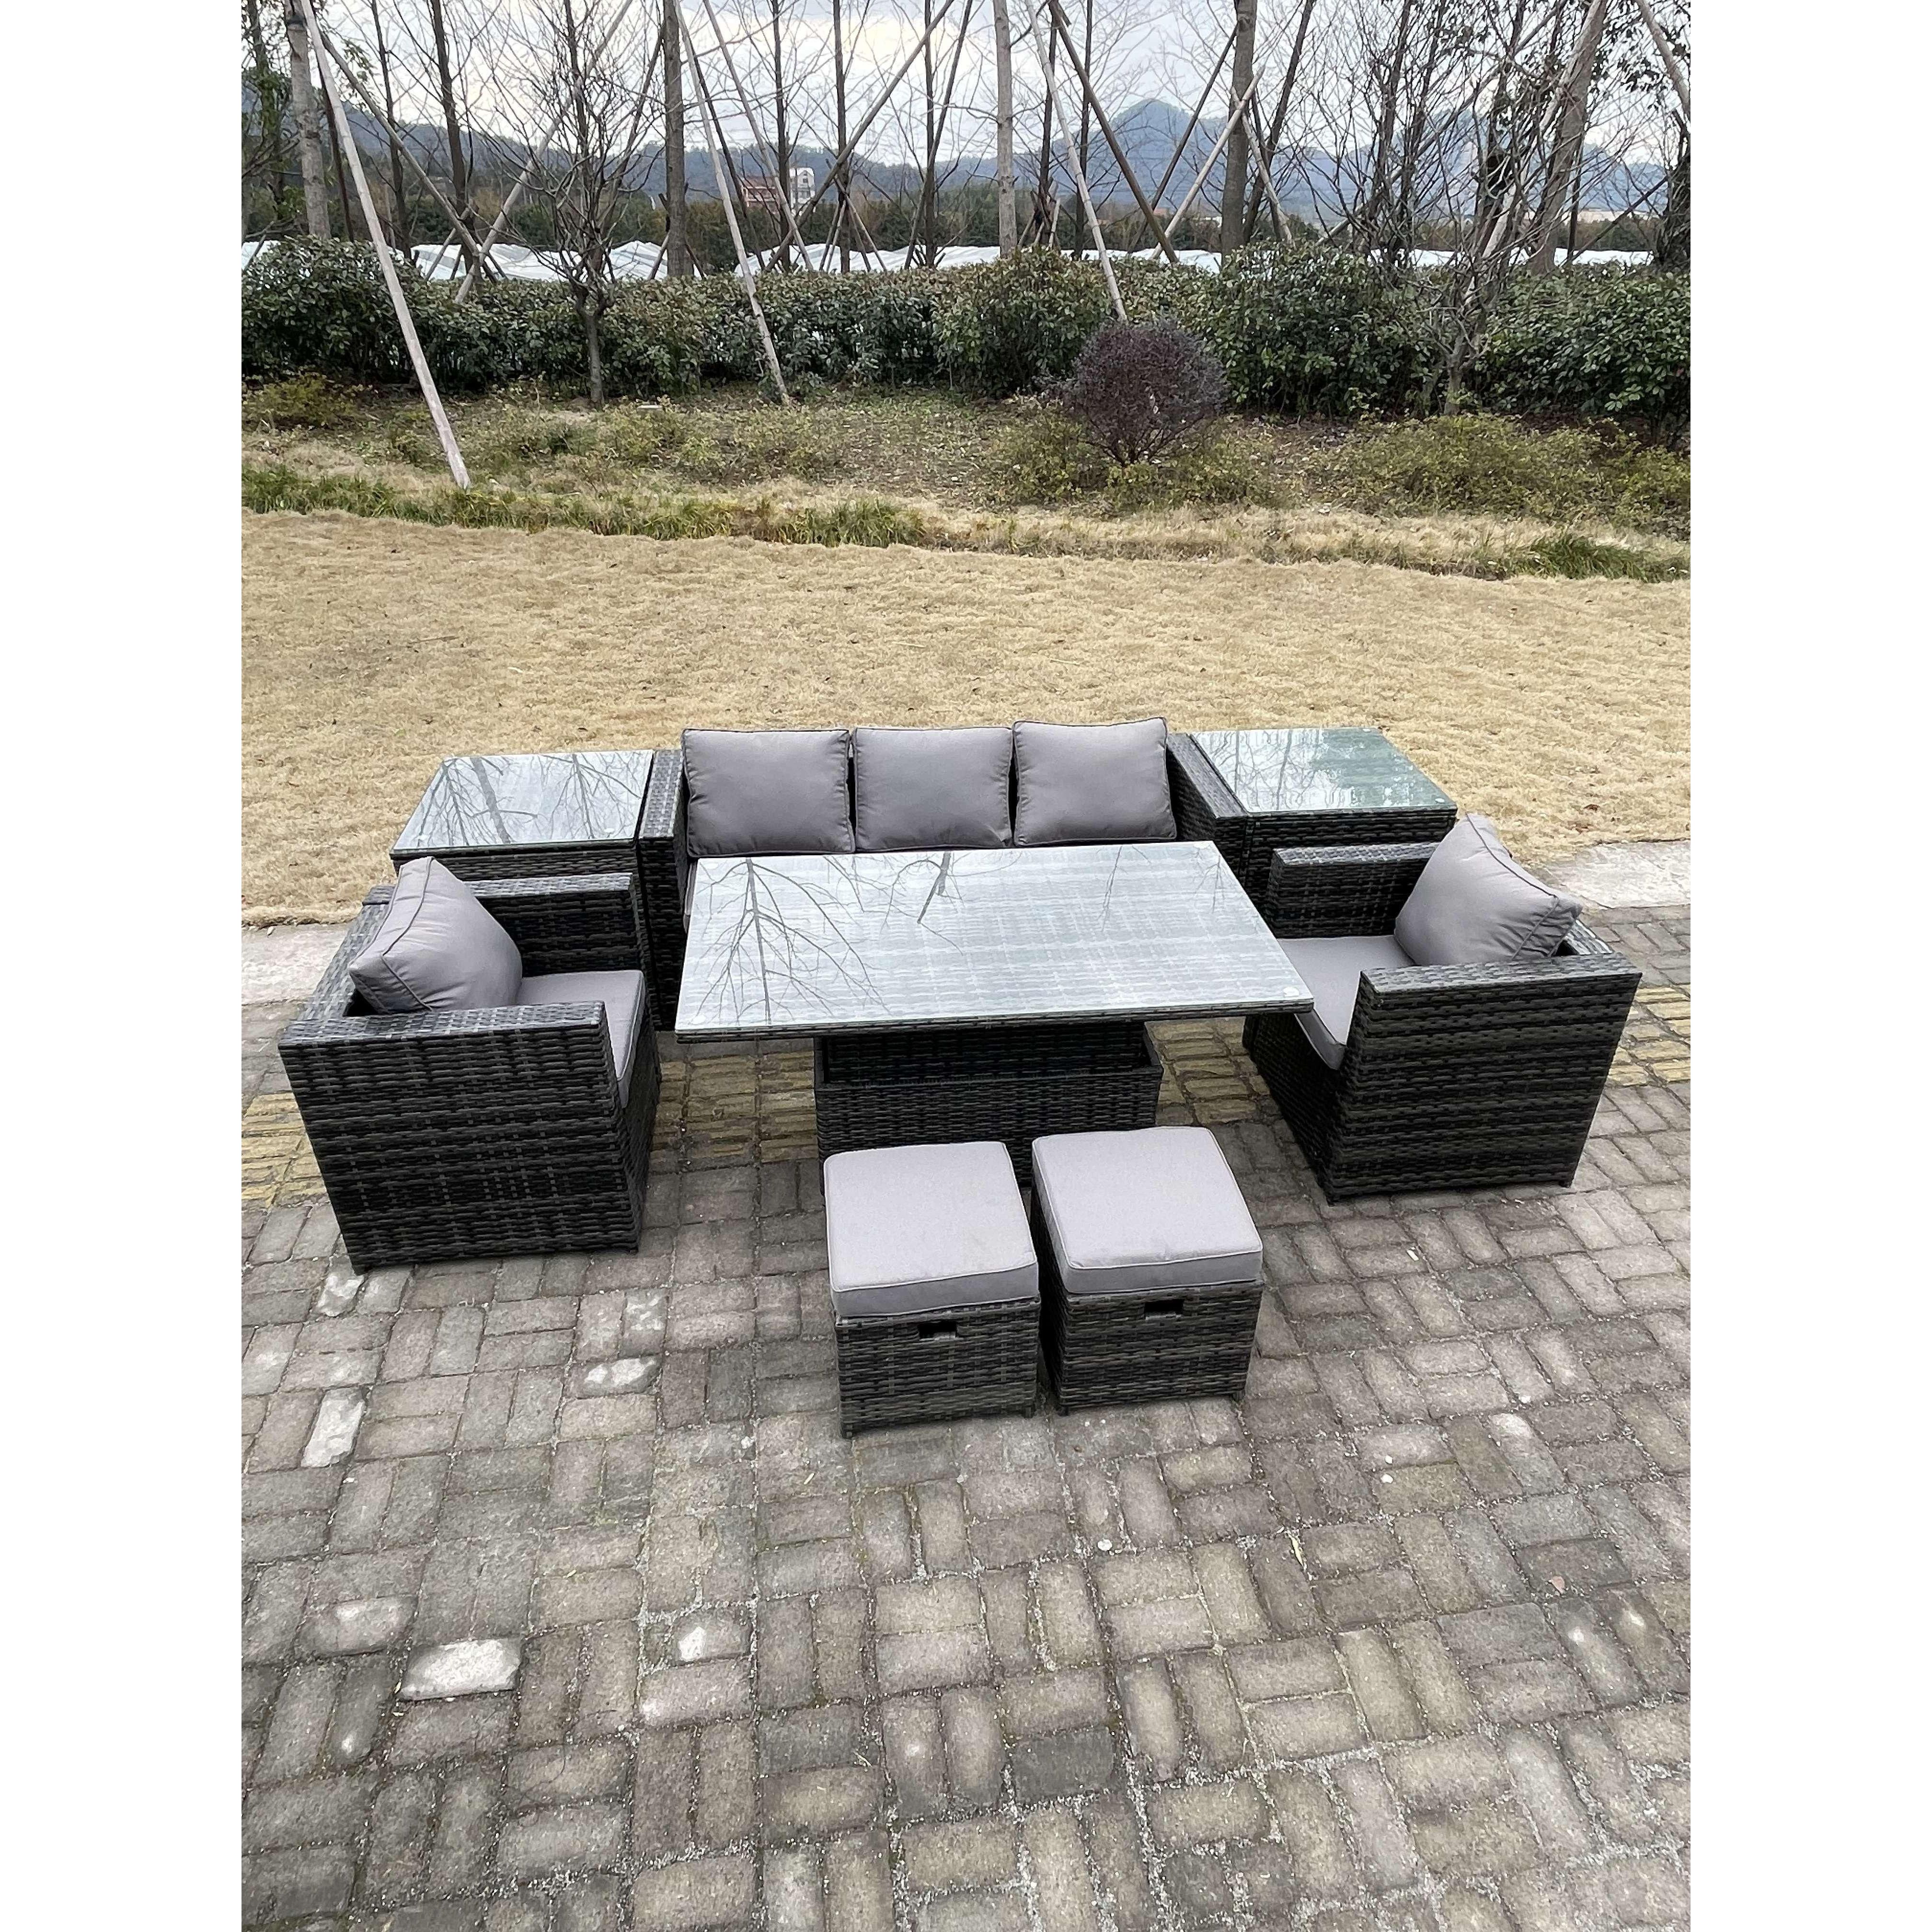 Rattan Garden Furniture Adjustable Rising Lifting Dining Table Sofa Set Chairs 2 Side Coffee Tables with 2 Stools - image 1